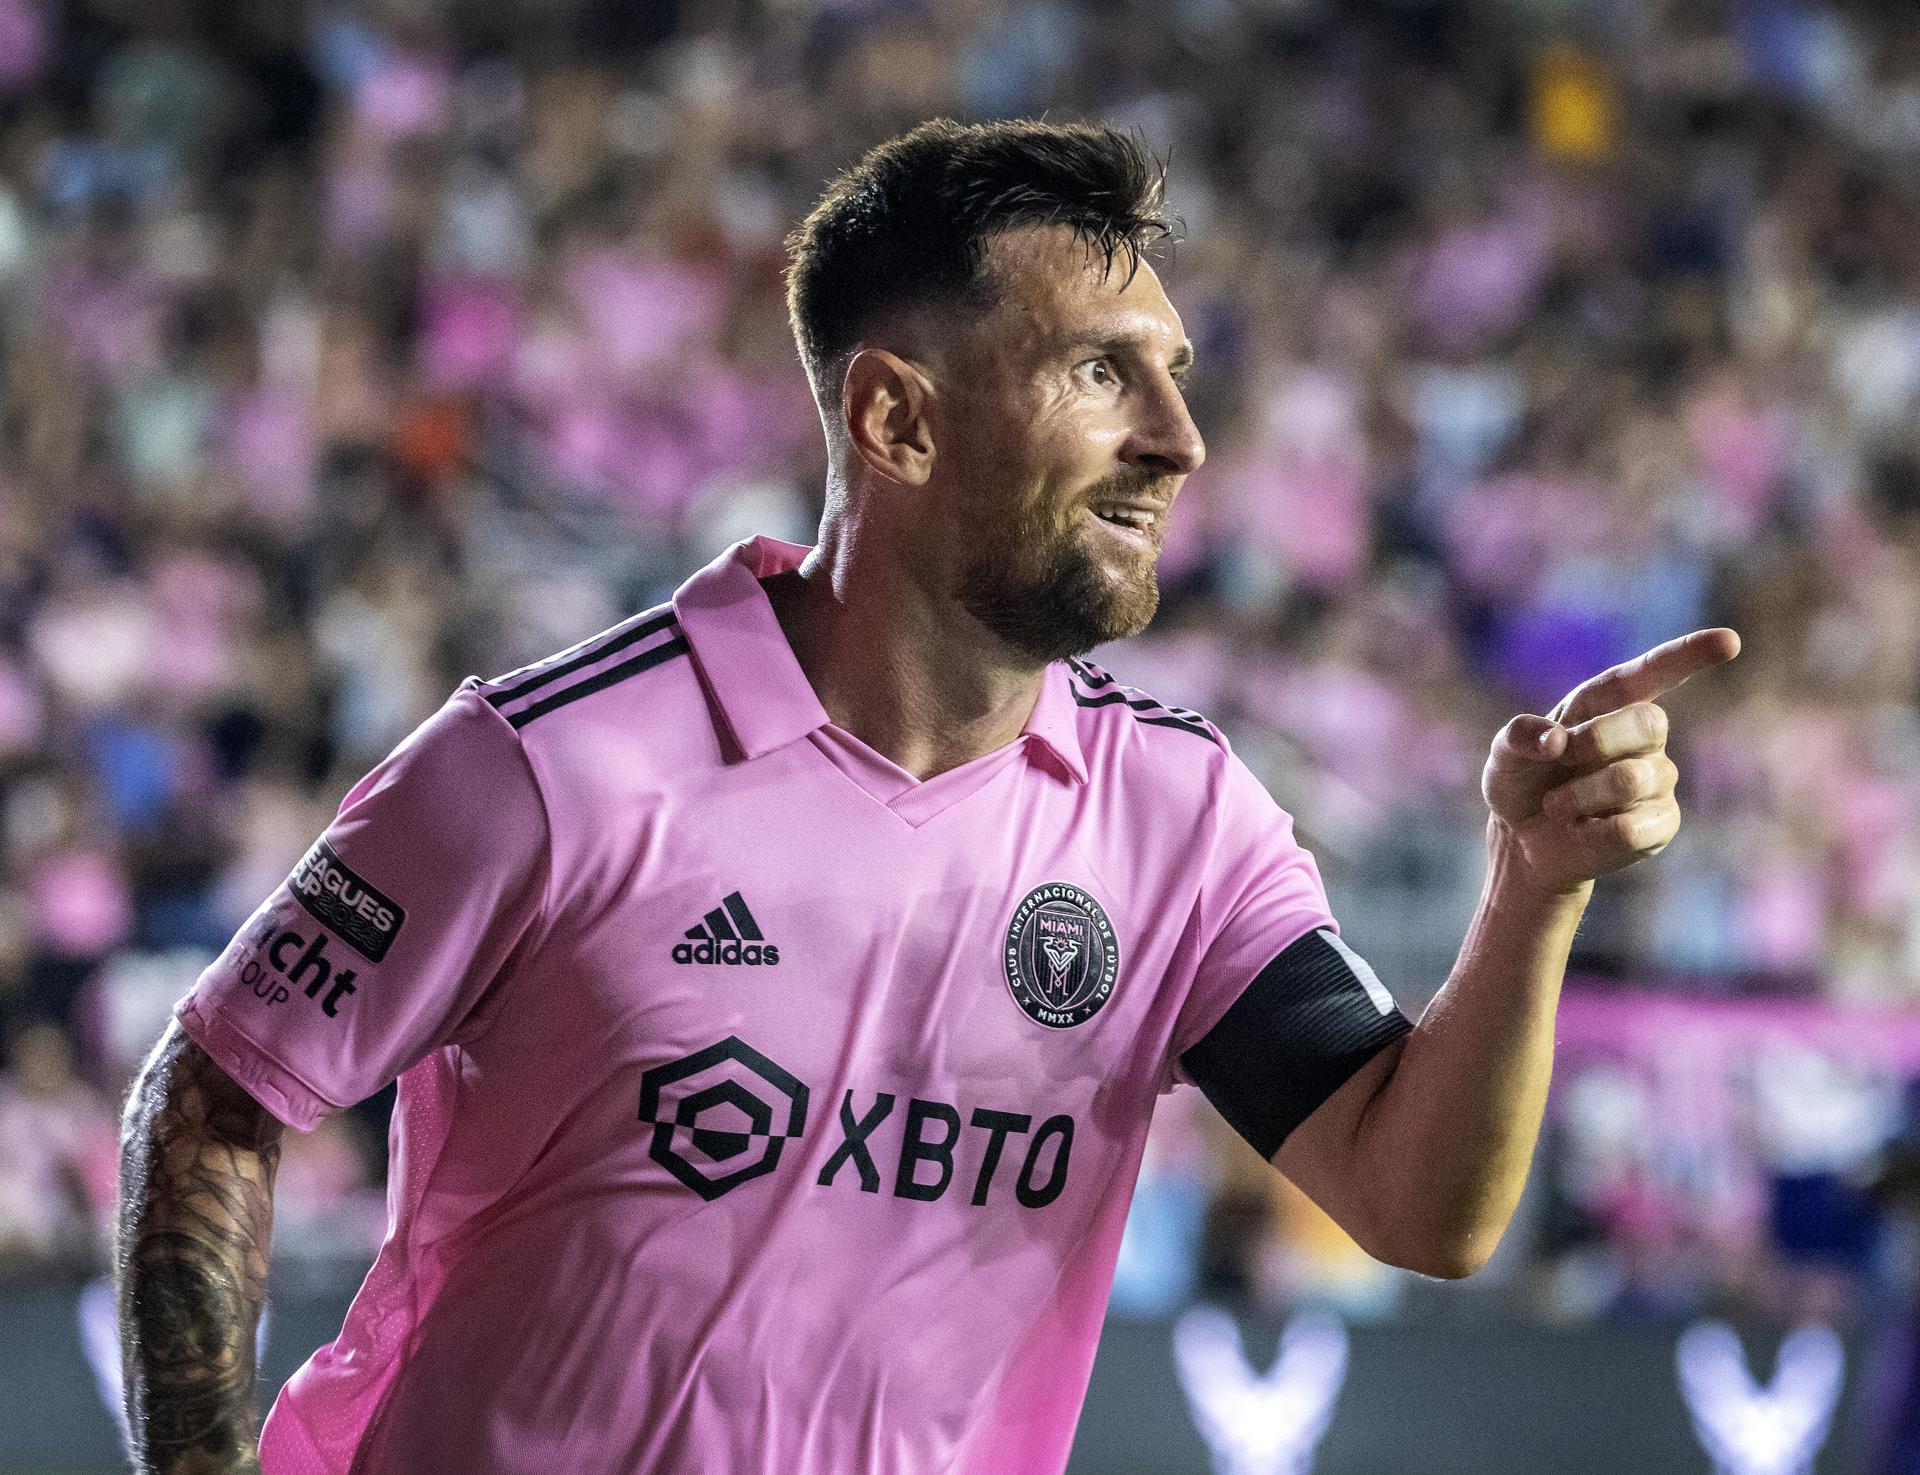 Inter Miami's Lionel Messi celebrates after scoring the 4-0 goal during the Leagues Cup quarter final soccer match between Inter Miami CF and Charlotte FC in Fort Lauderdale, Florida, US, 11 August 2023. EFE-EPA/CRISTOBAL HERRERA-ULASHKEVICH